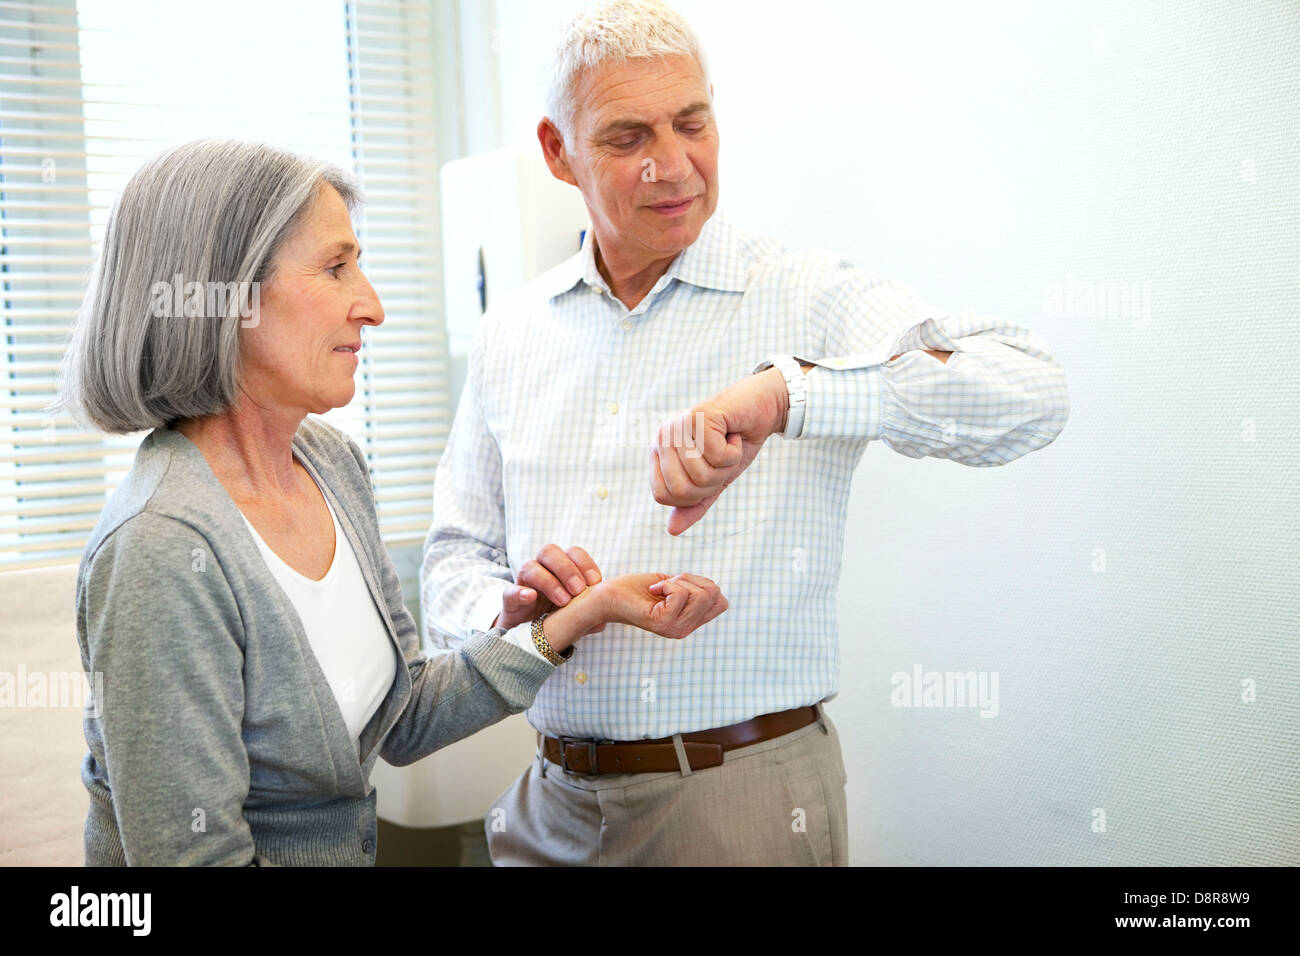 TAKING AN ELDERLY PERSON'S PULSE Stock Photo